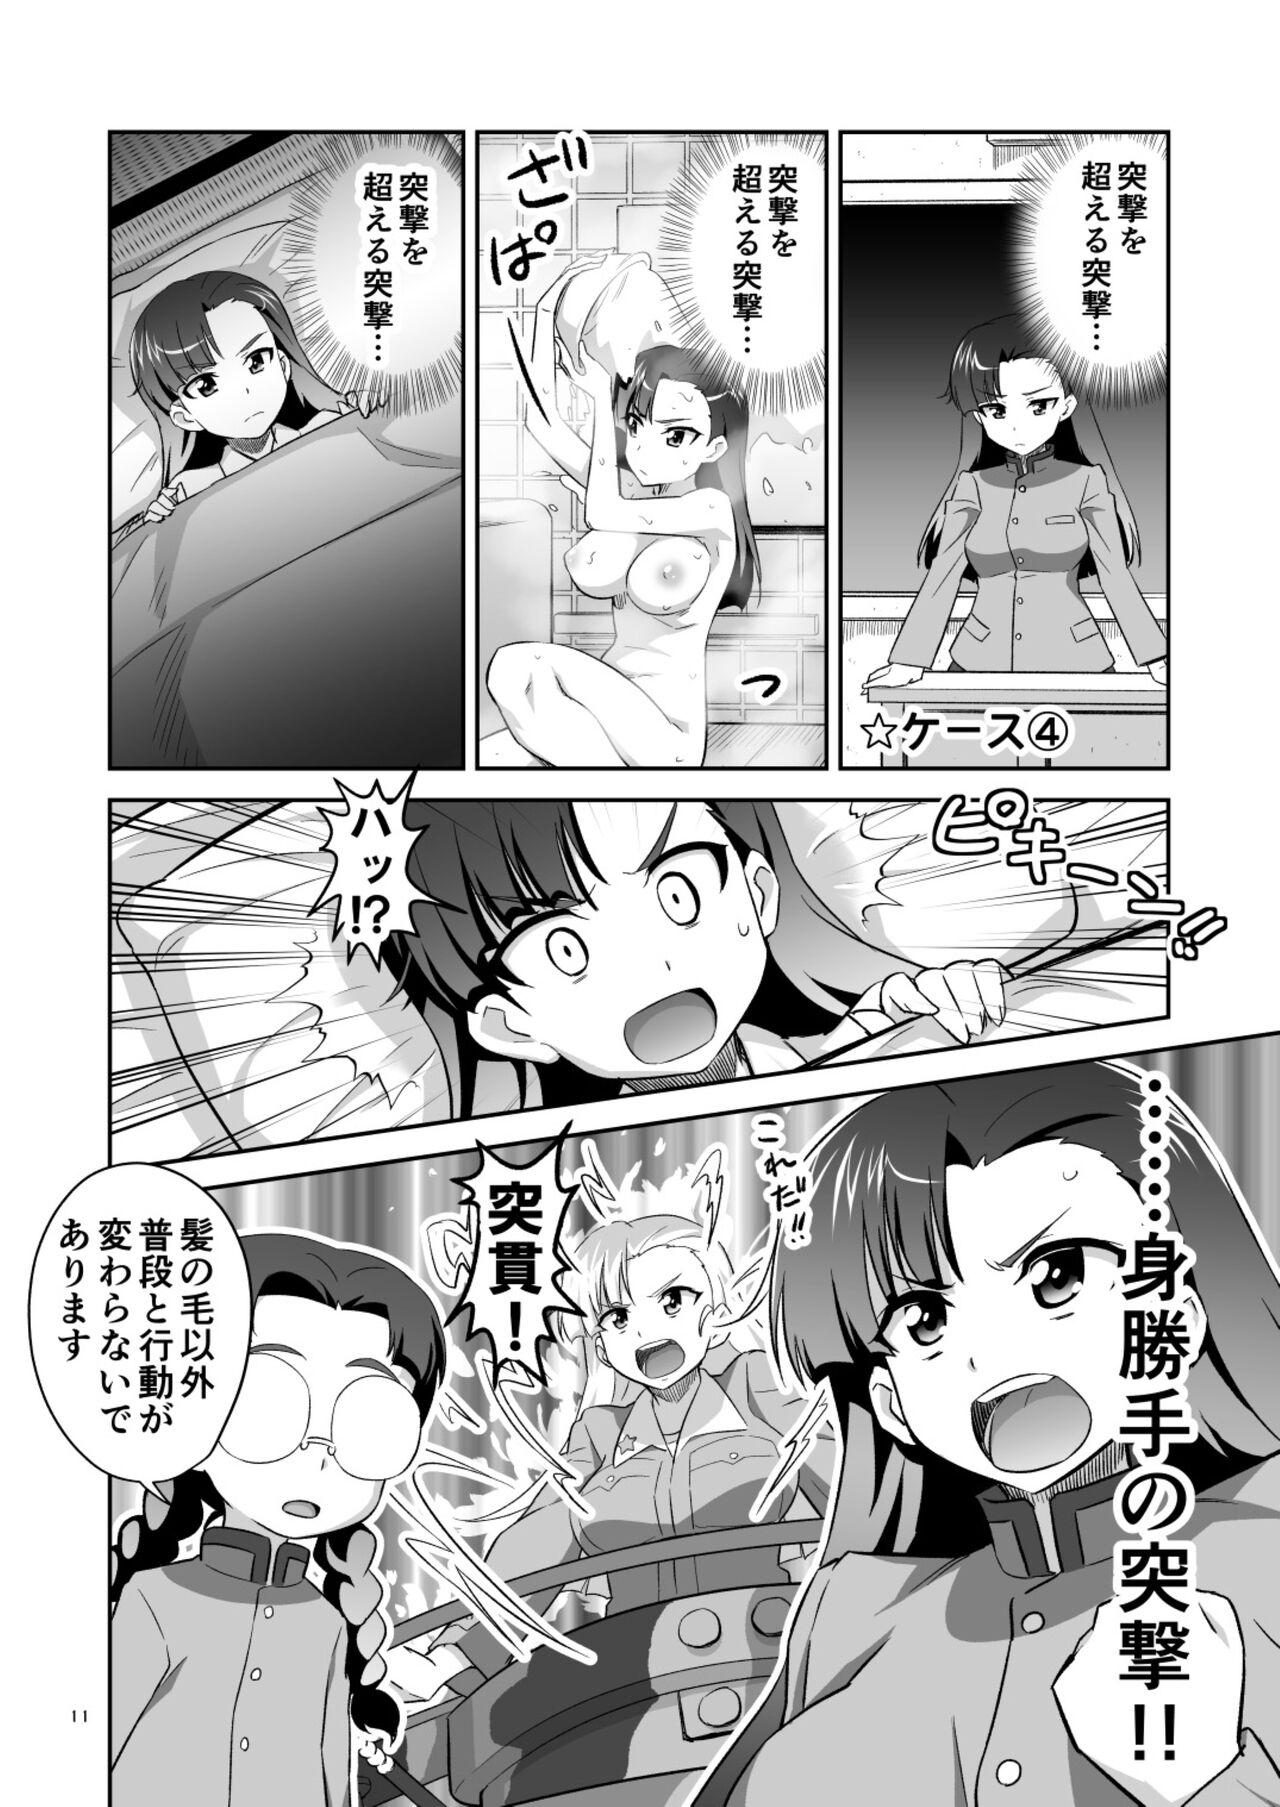 Toes TURIME-DO 4 - Girls und panzer Short Hair - Page 11